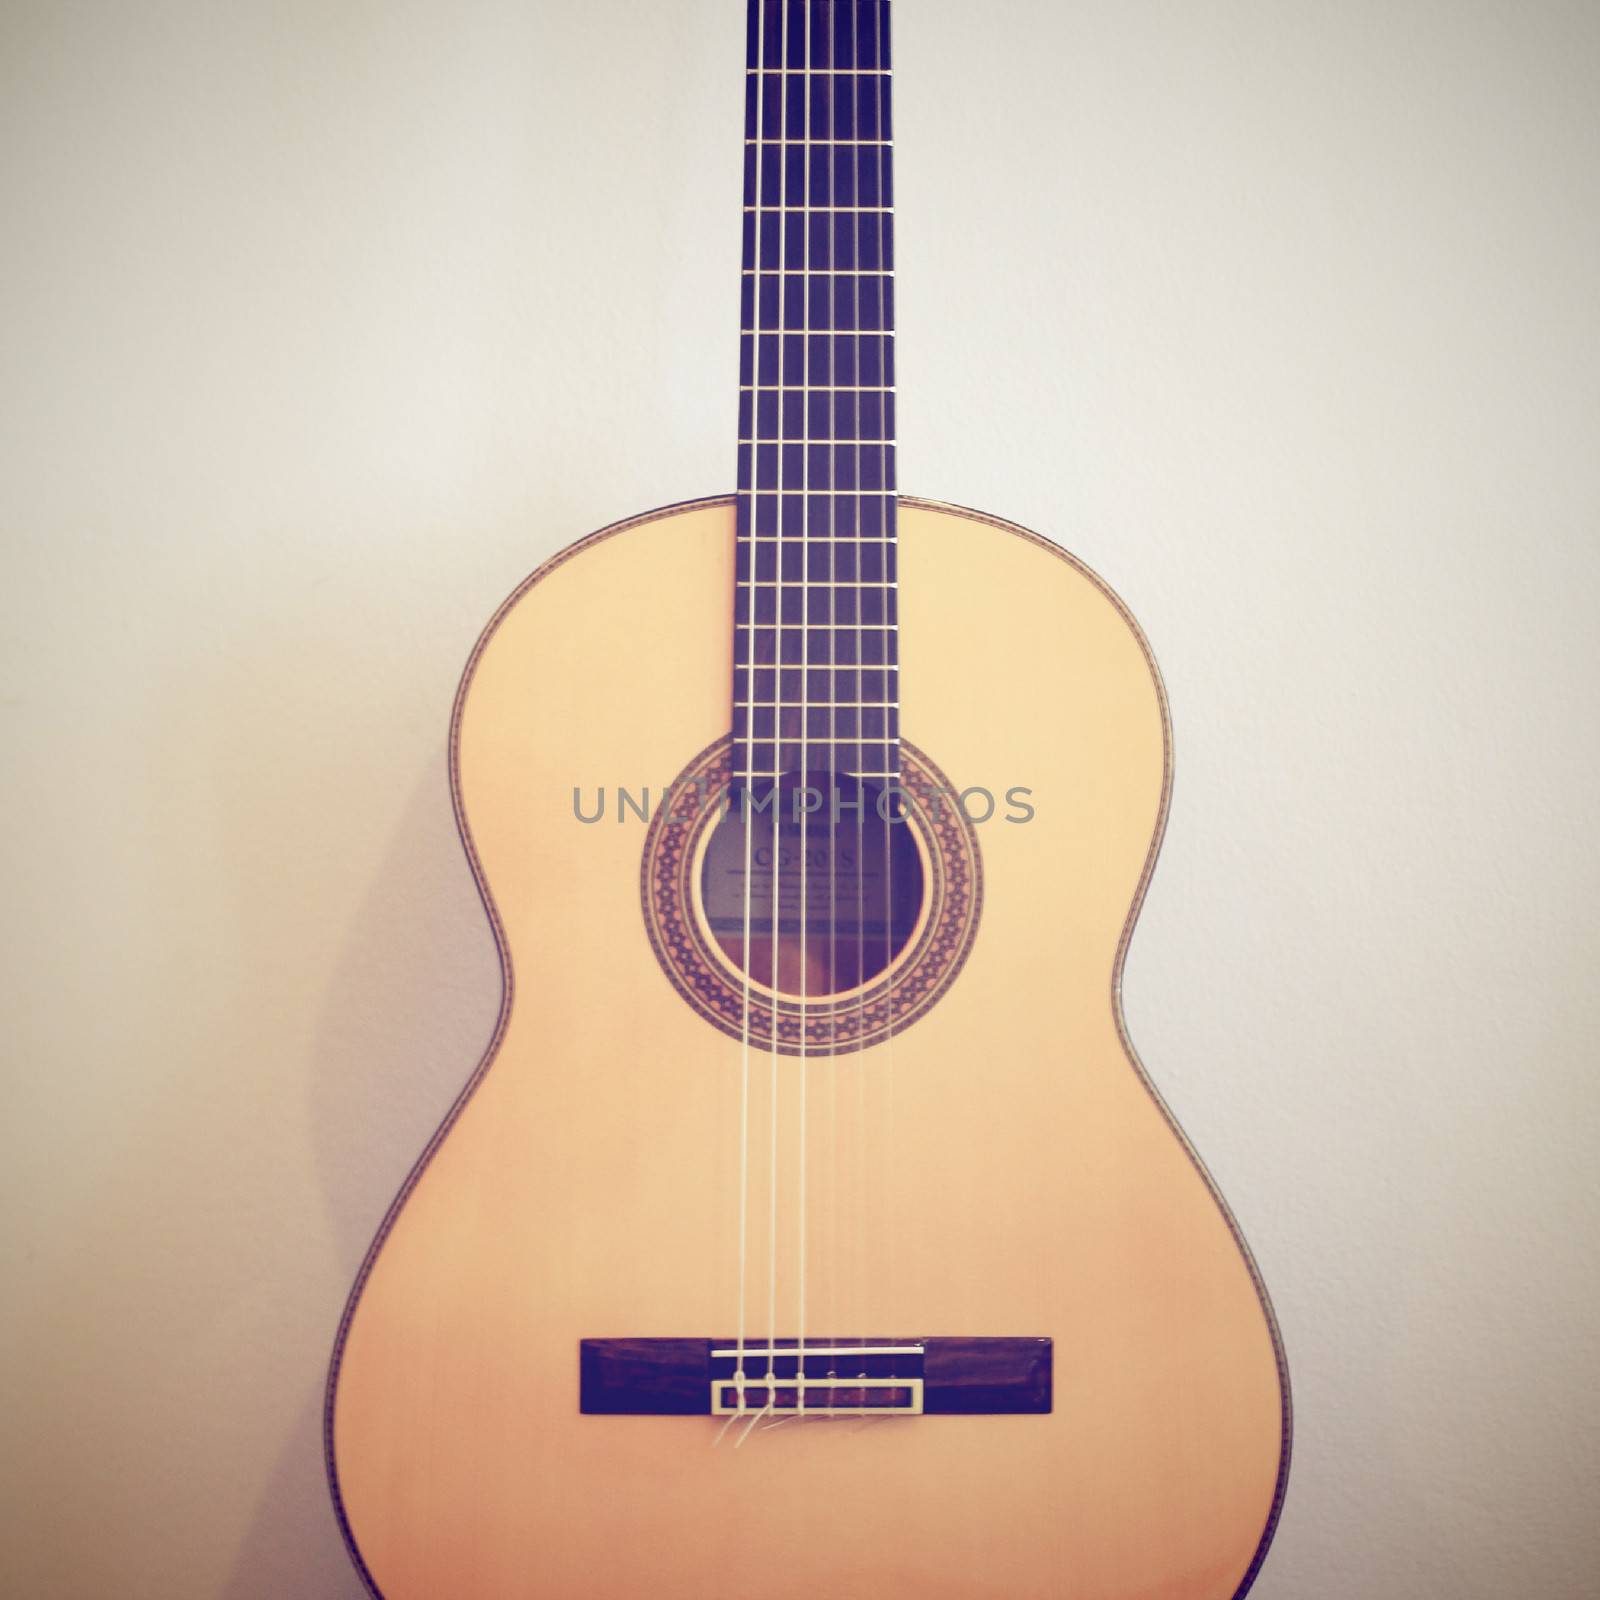 Classical guitar with retro filter effect by nuchylee